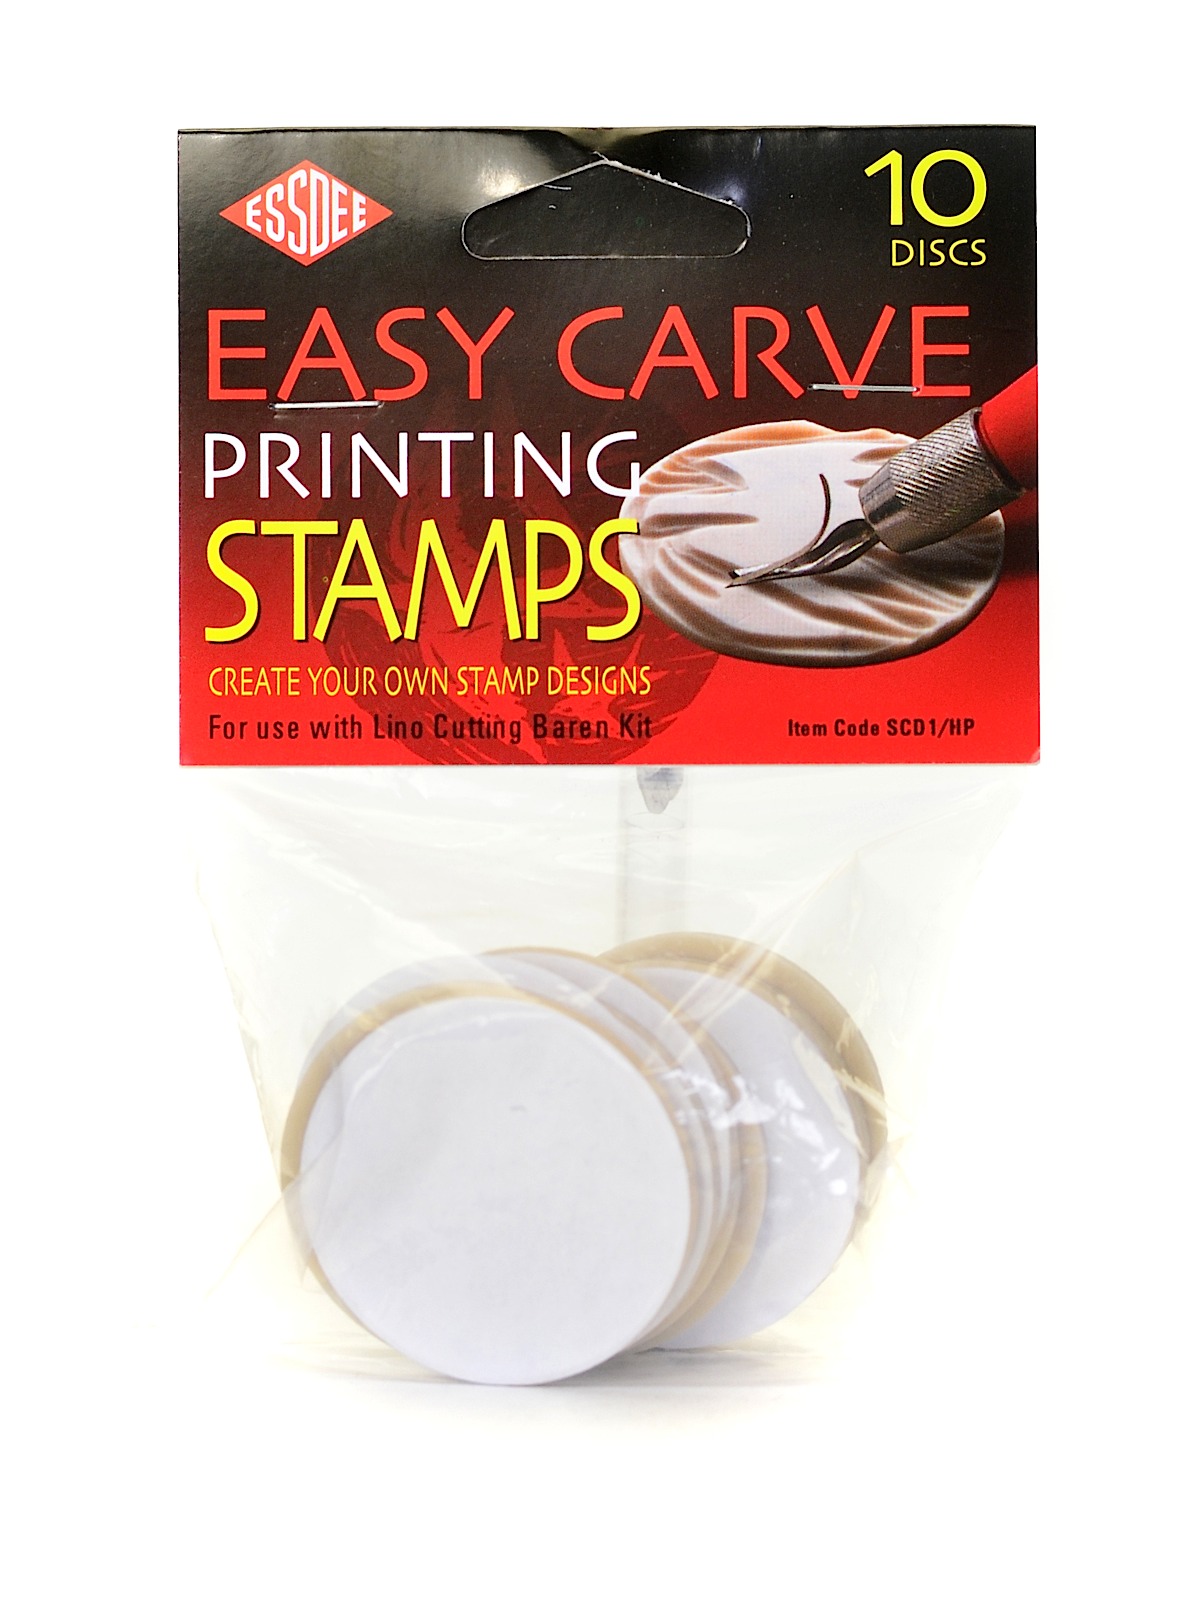 Lino Cutter & Stamp Carving Kit Pack Of 10 Stamps